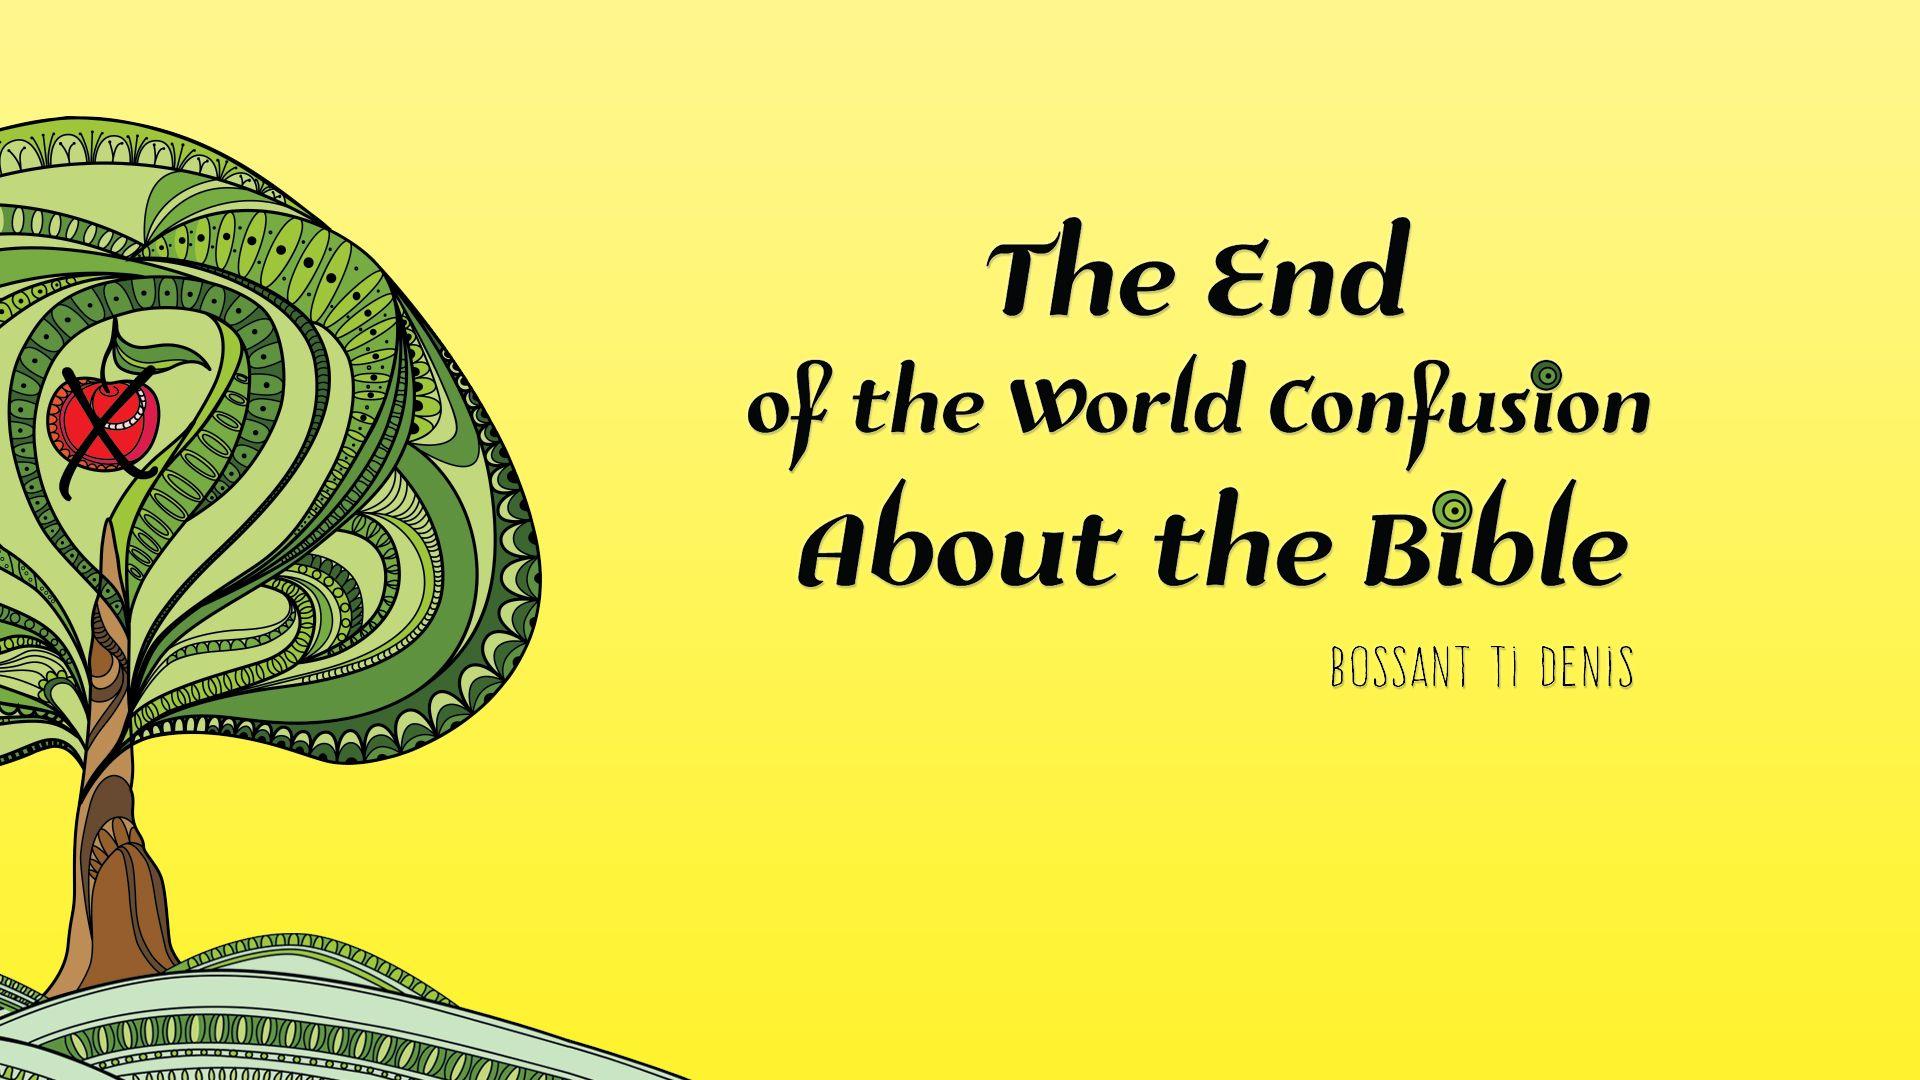 Downloads. The End of the World Confusion About the Bible